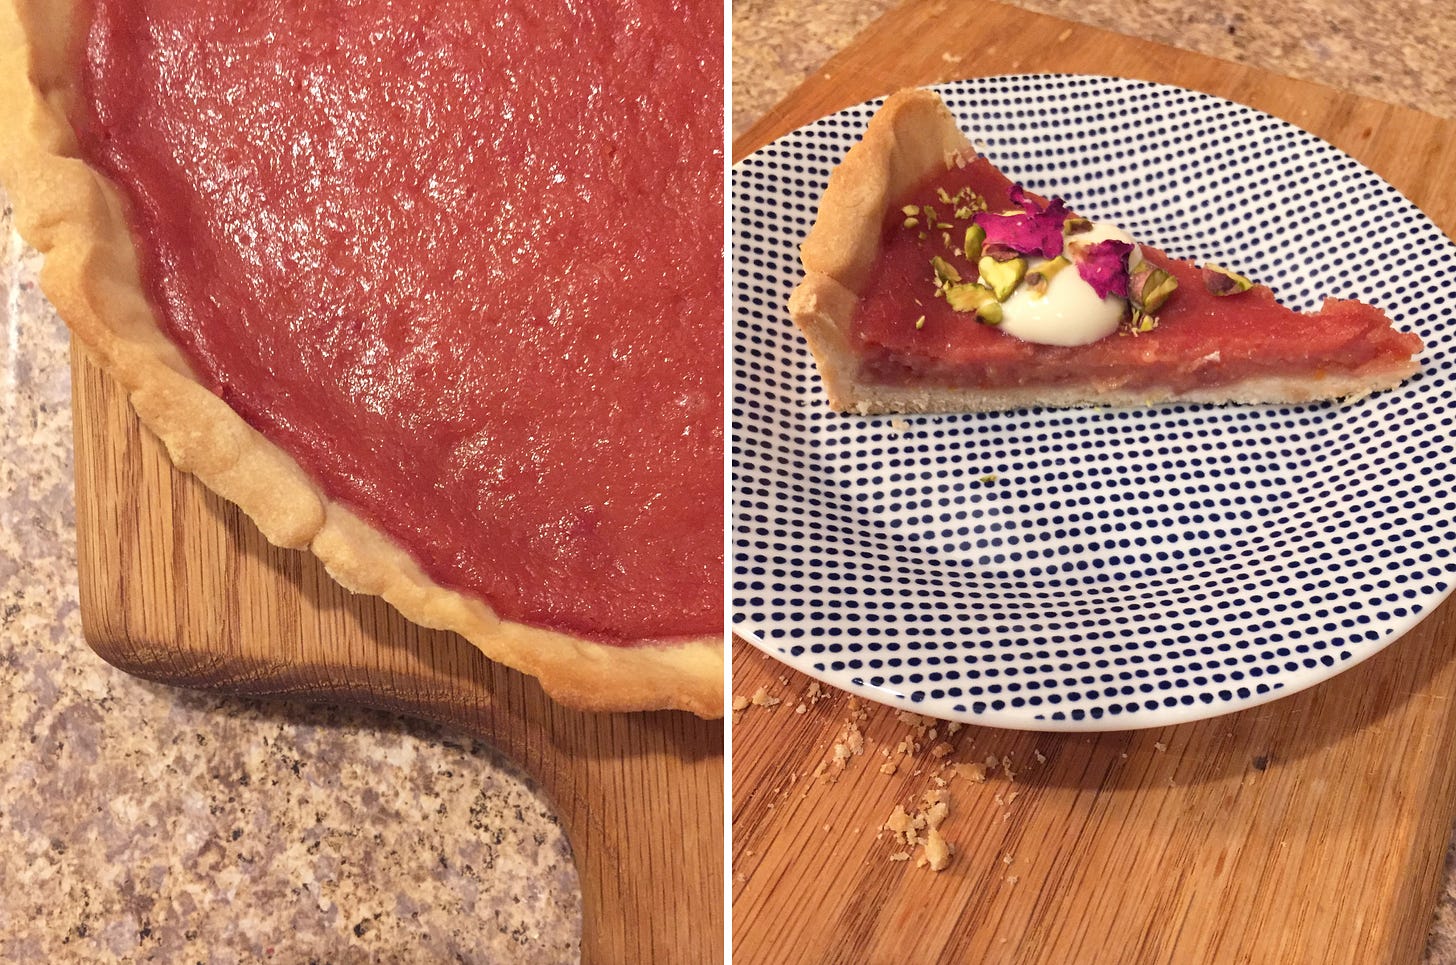 Left image: on a breadboard, the bottom corner of a tart with dark pink filling. Right image: A slice of the tart on a blue and white plate on top of the breadboard, with a dollop of yogurt on top, and chopped pistachios and rose petals sprinkled over.